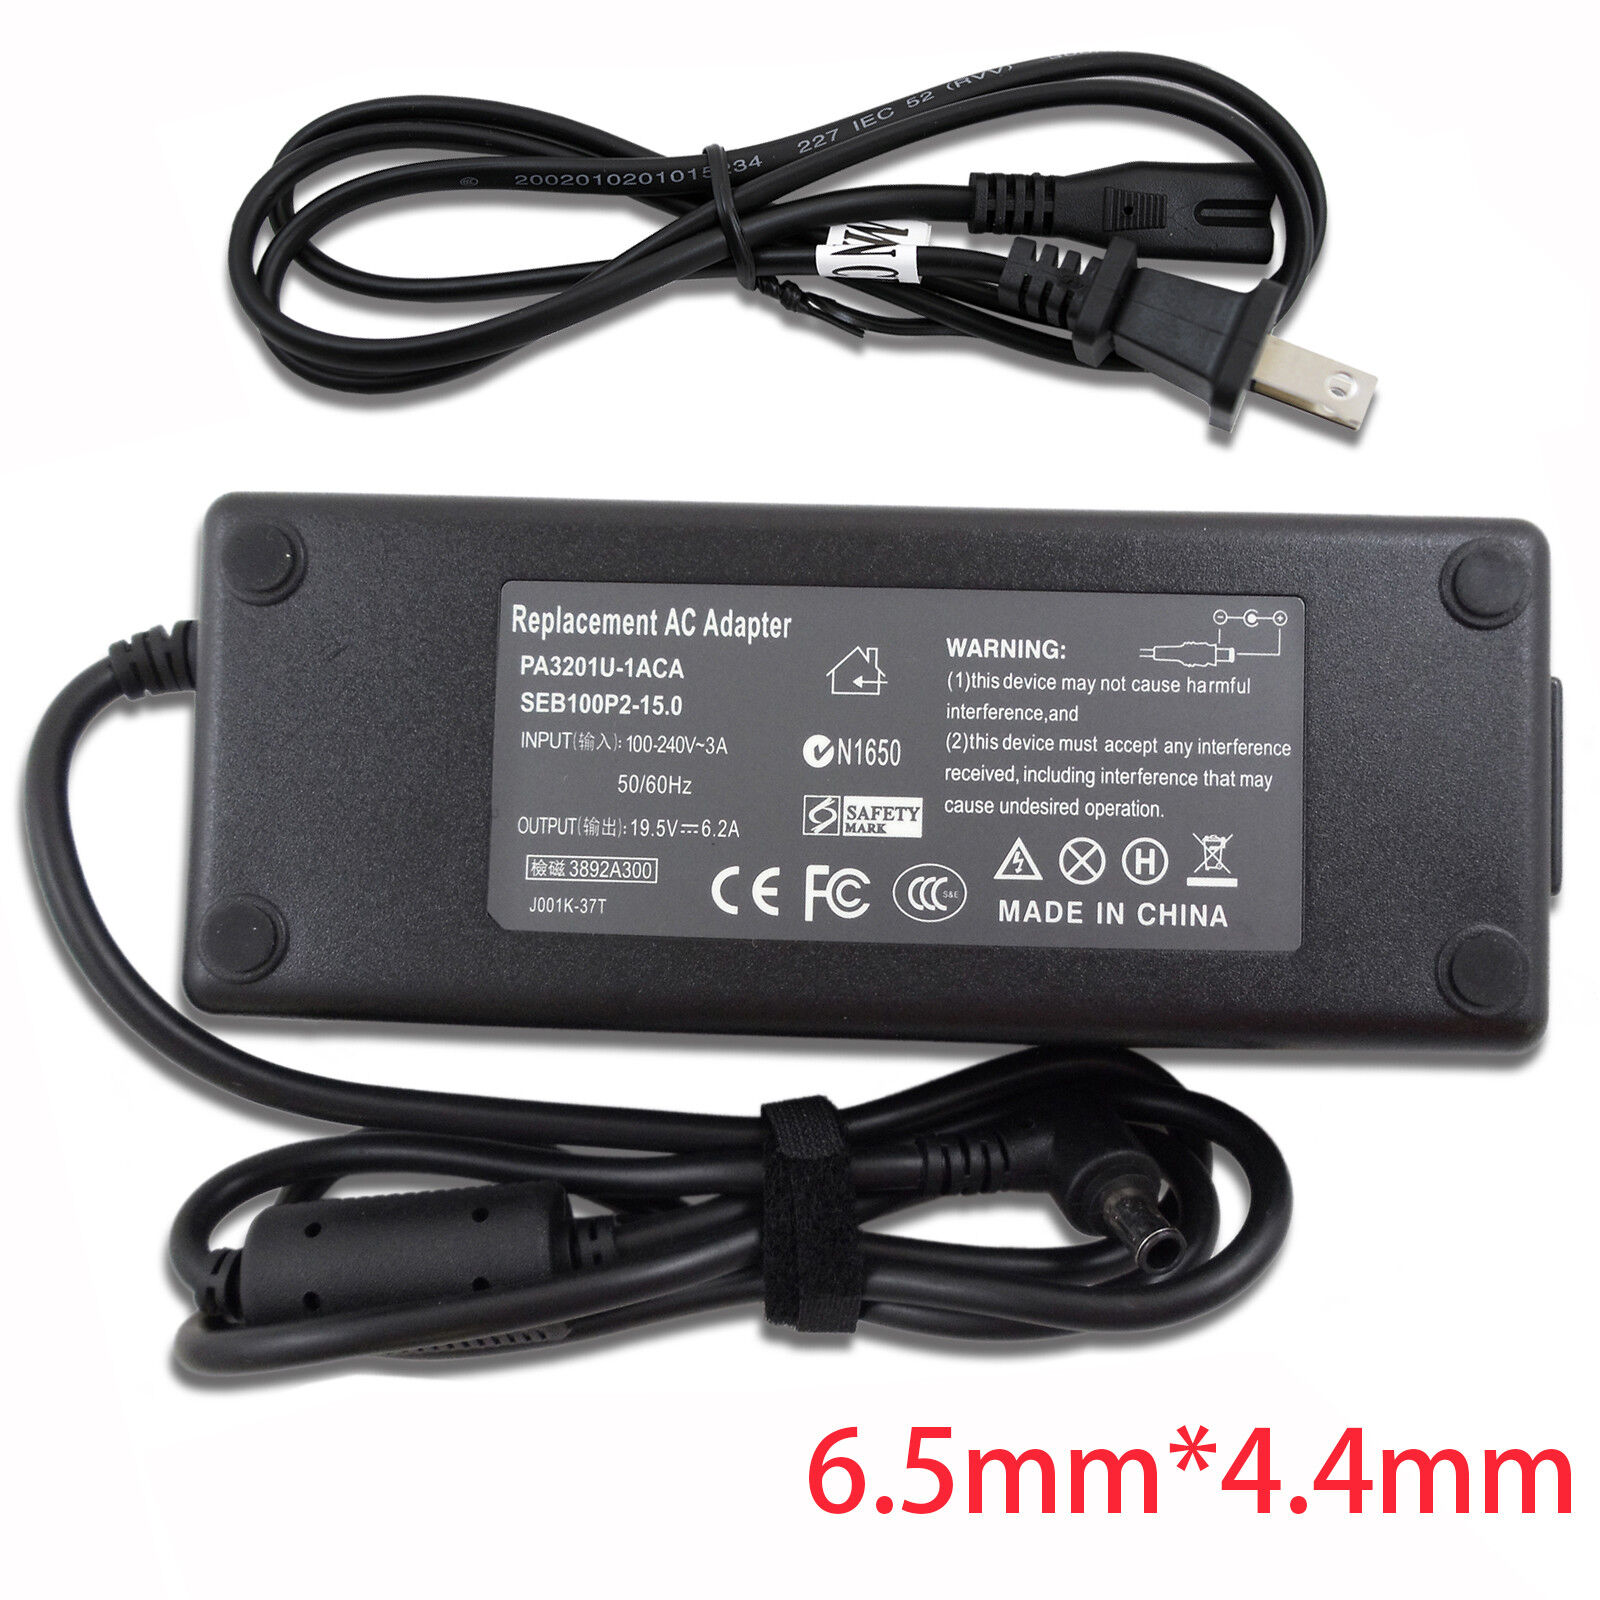 19.5V 6.2A 120W AC Adapter Charger For Sony Vaio PCG-81114L Laptop Supply Cord